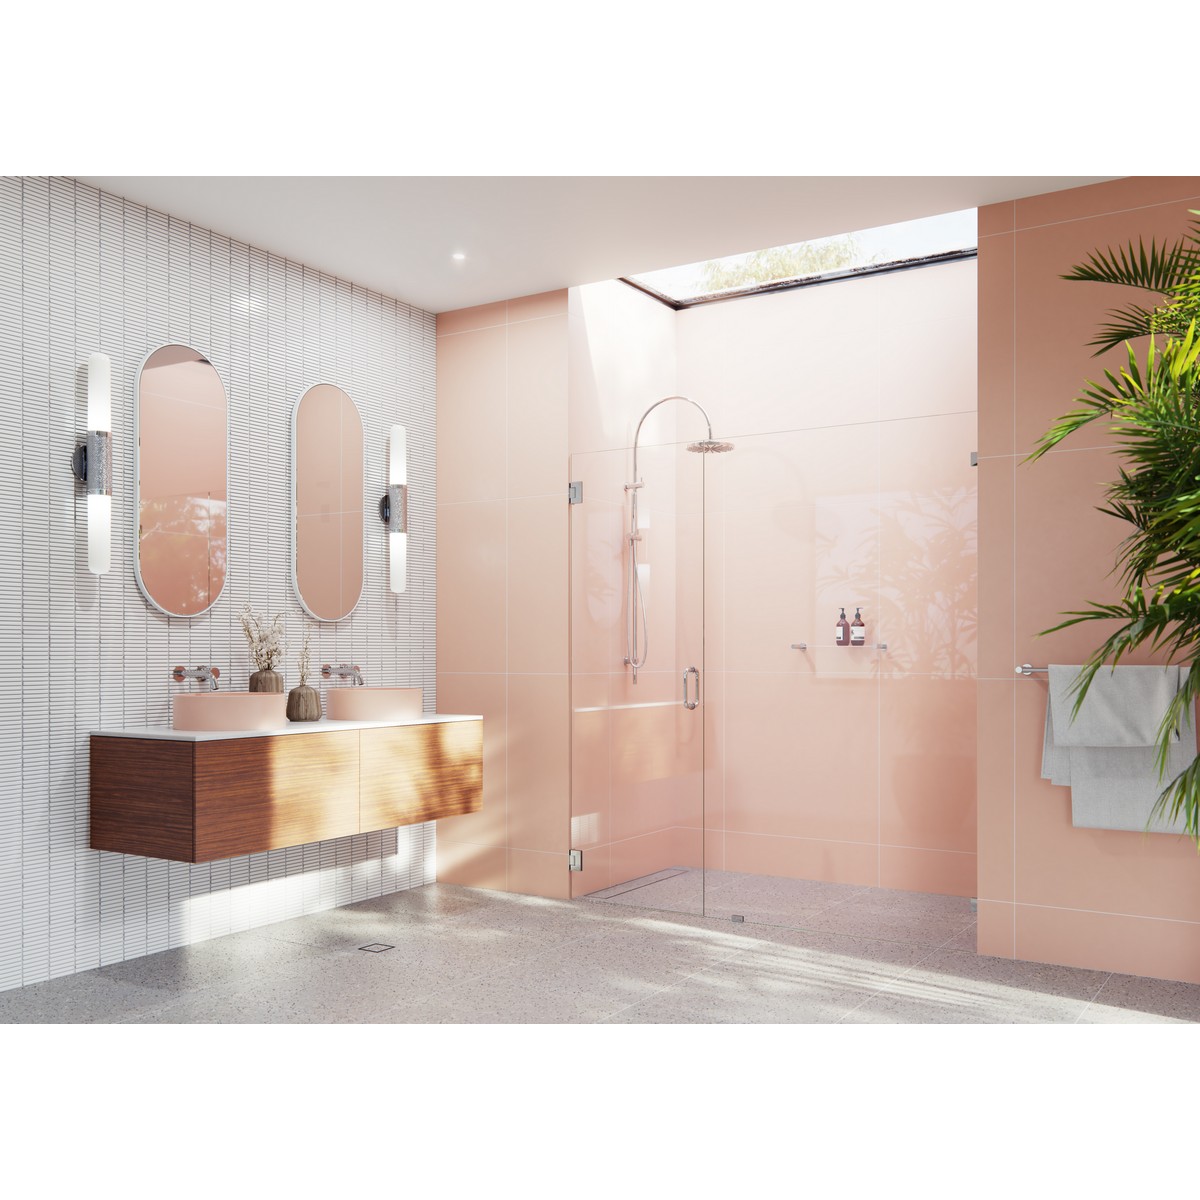 GLASS WAREHOUSE GW-WH-71.75 ILLUME 71 3/4 W X 78 H WALL HINGED FULLY FRAMELESS GLASS SHOWER ENCLOSURE